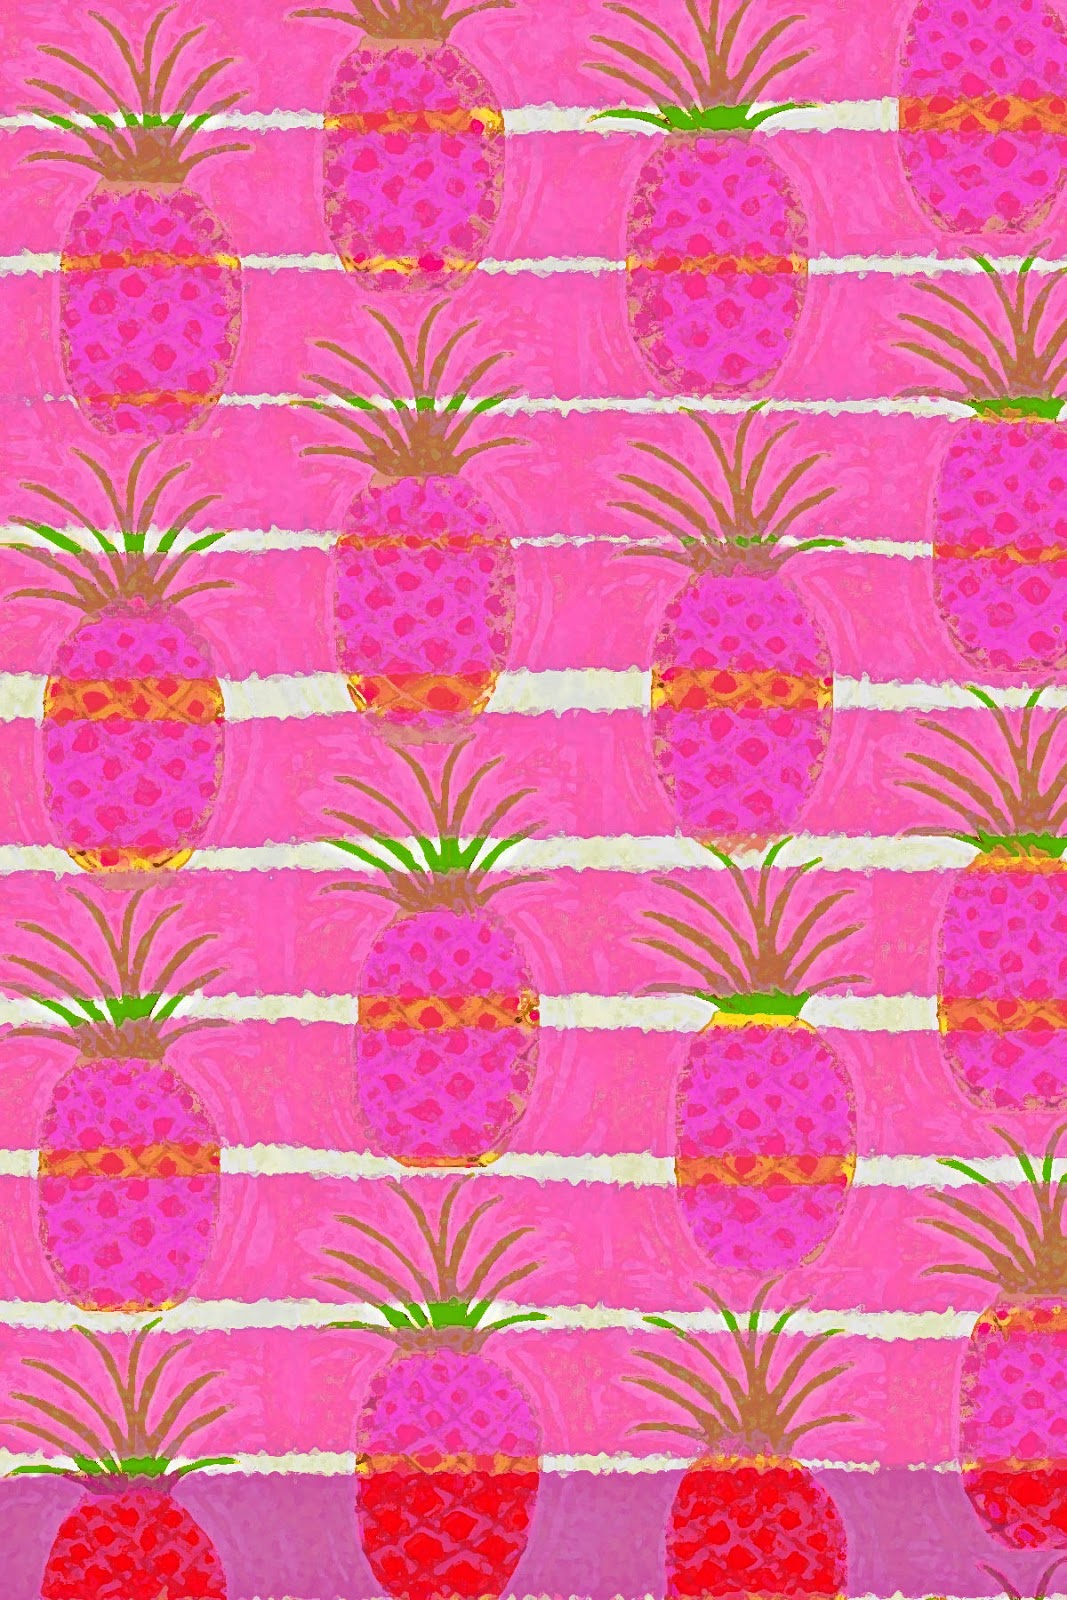 Tumblr Pineapple Background Pink pineapples